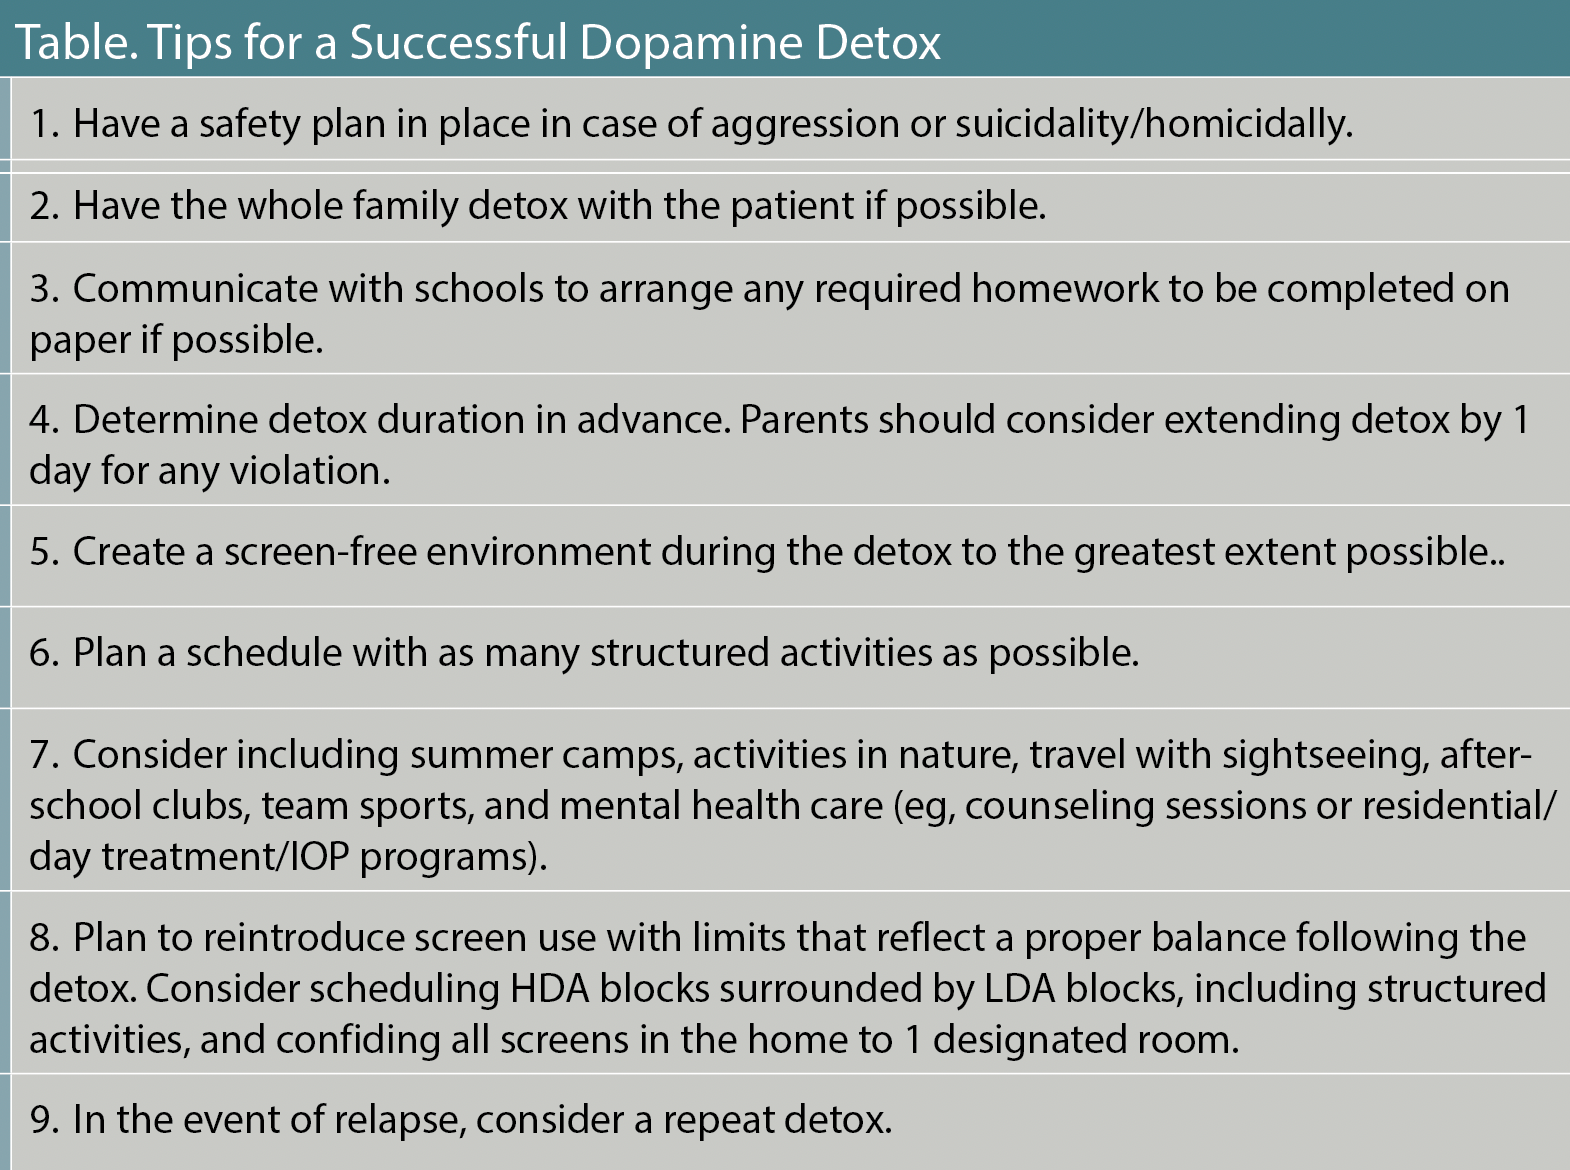 Table. Tips for a Successful Dopamine Detox